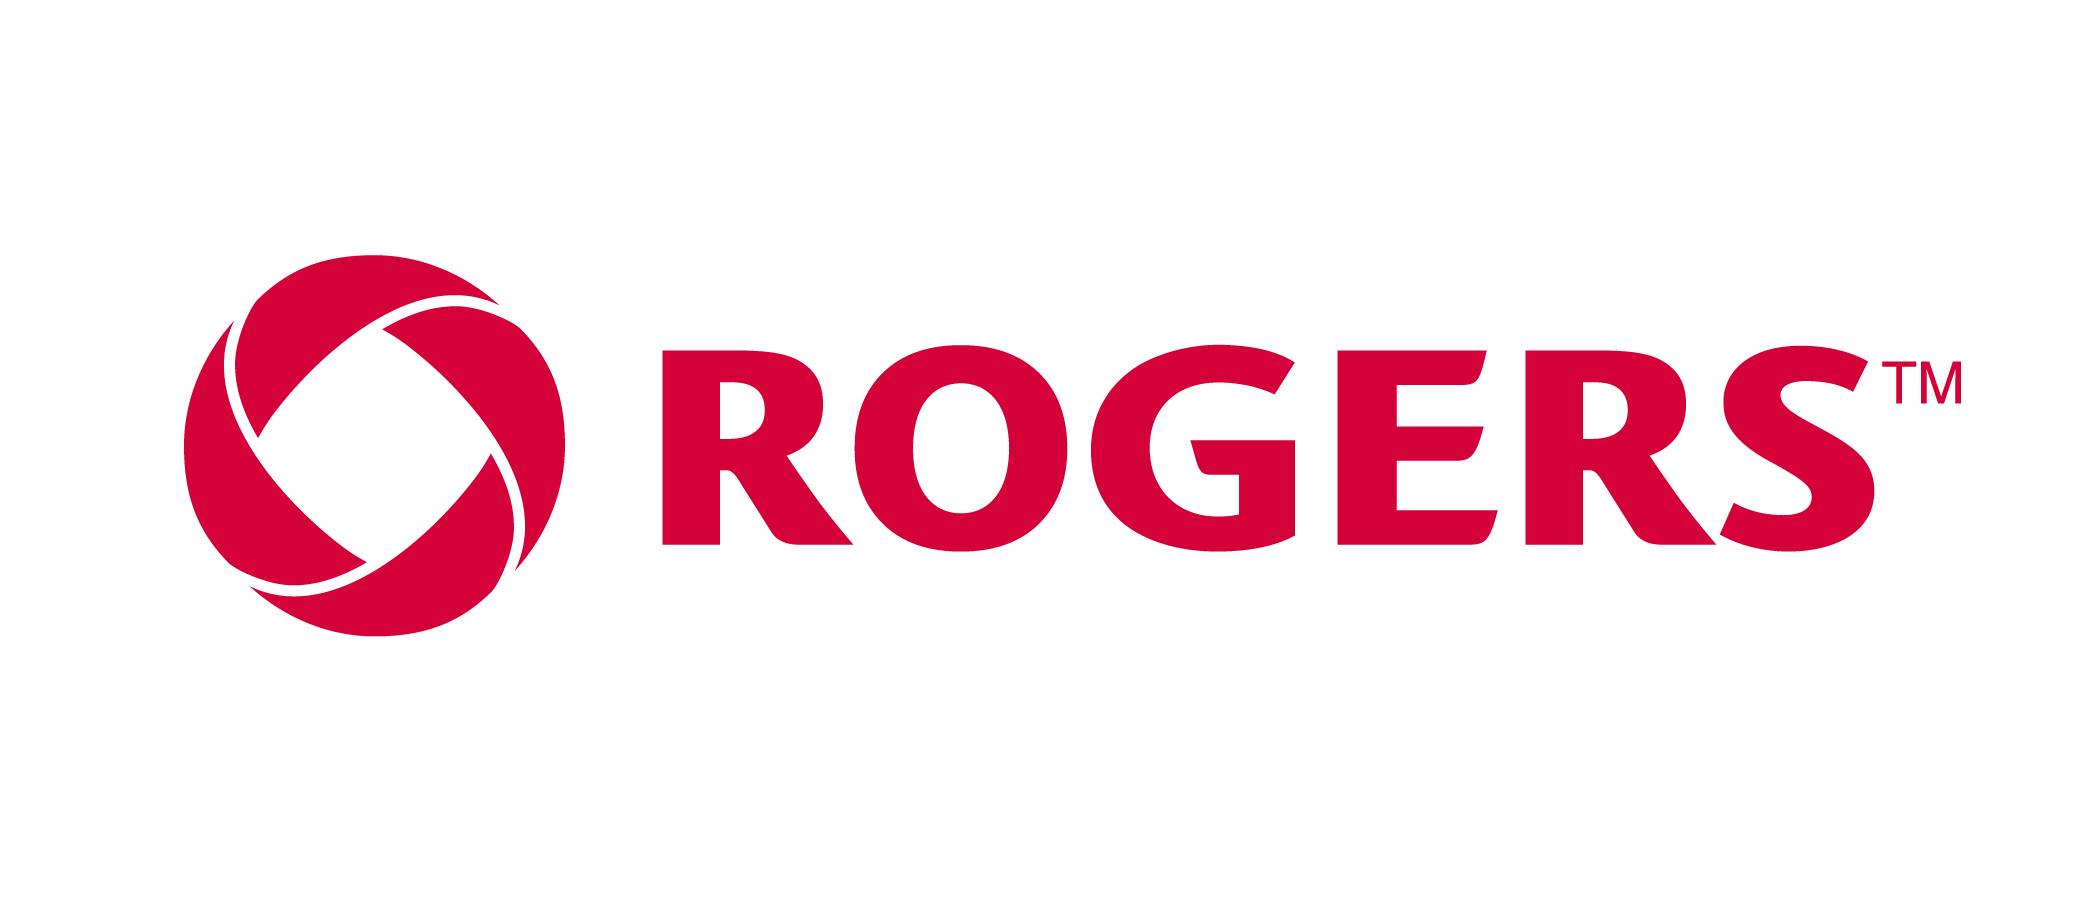 Rogers NHL GameCentre LIVE Delivers New Ways to Watch the Game